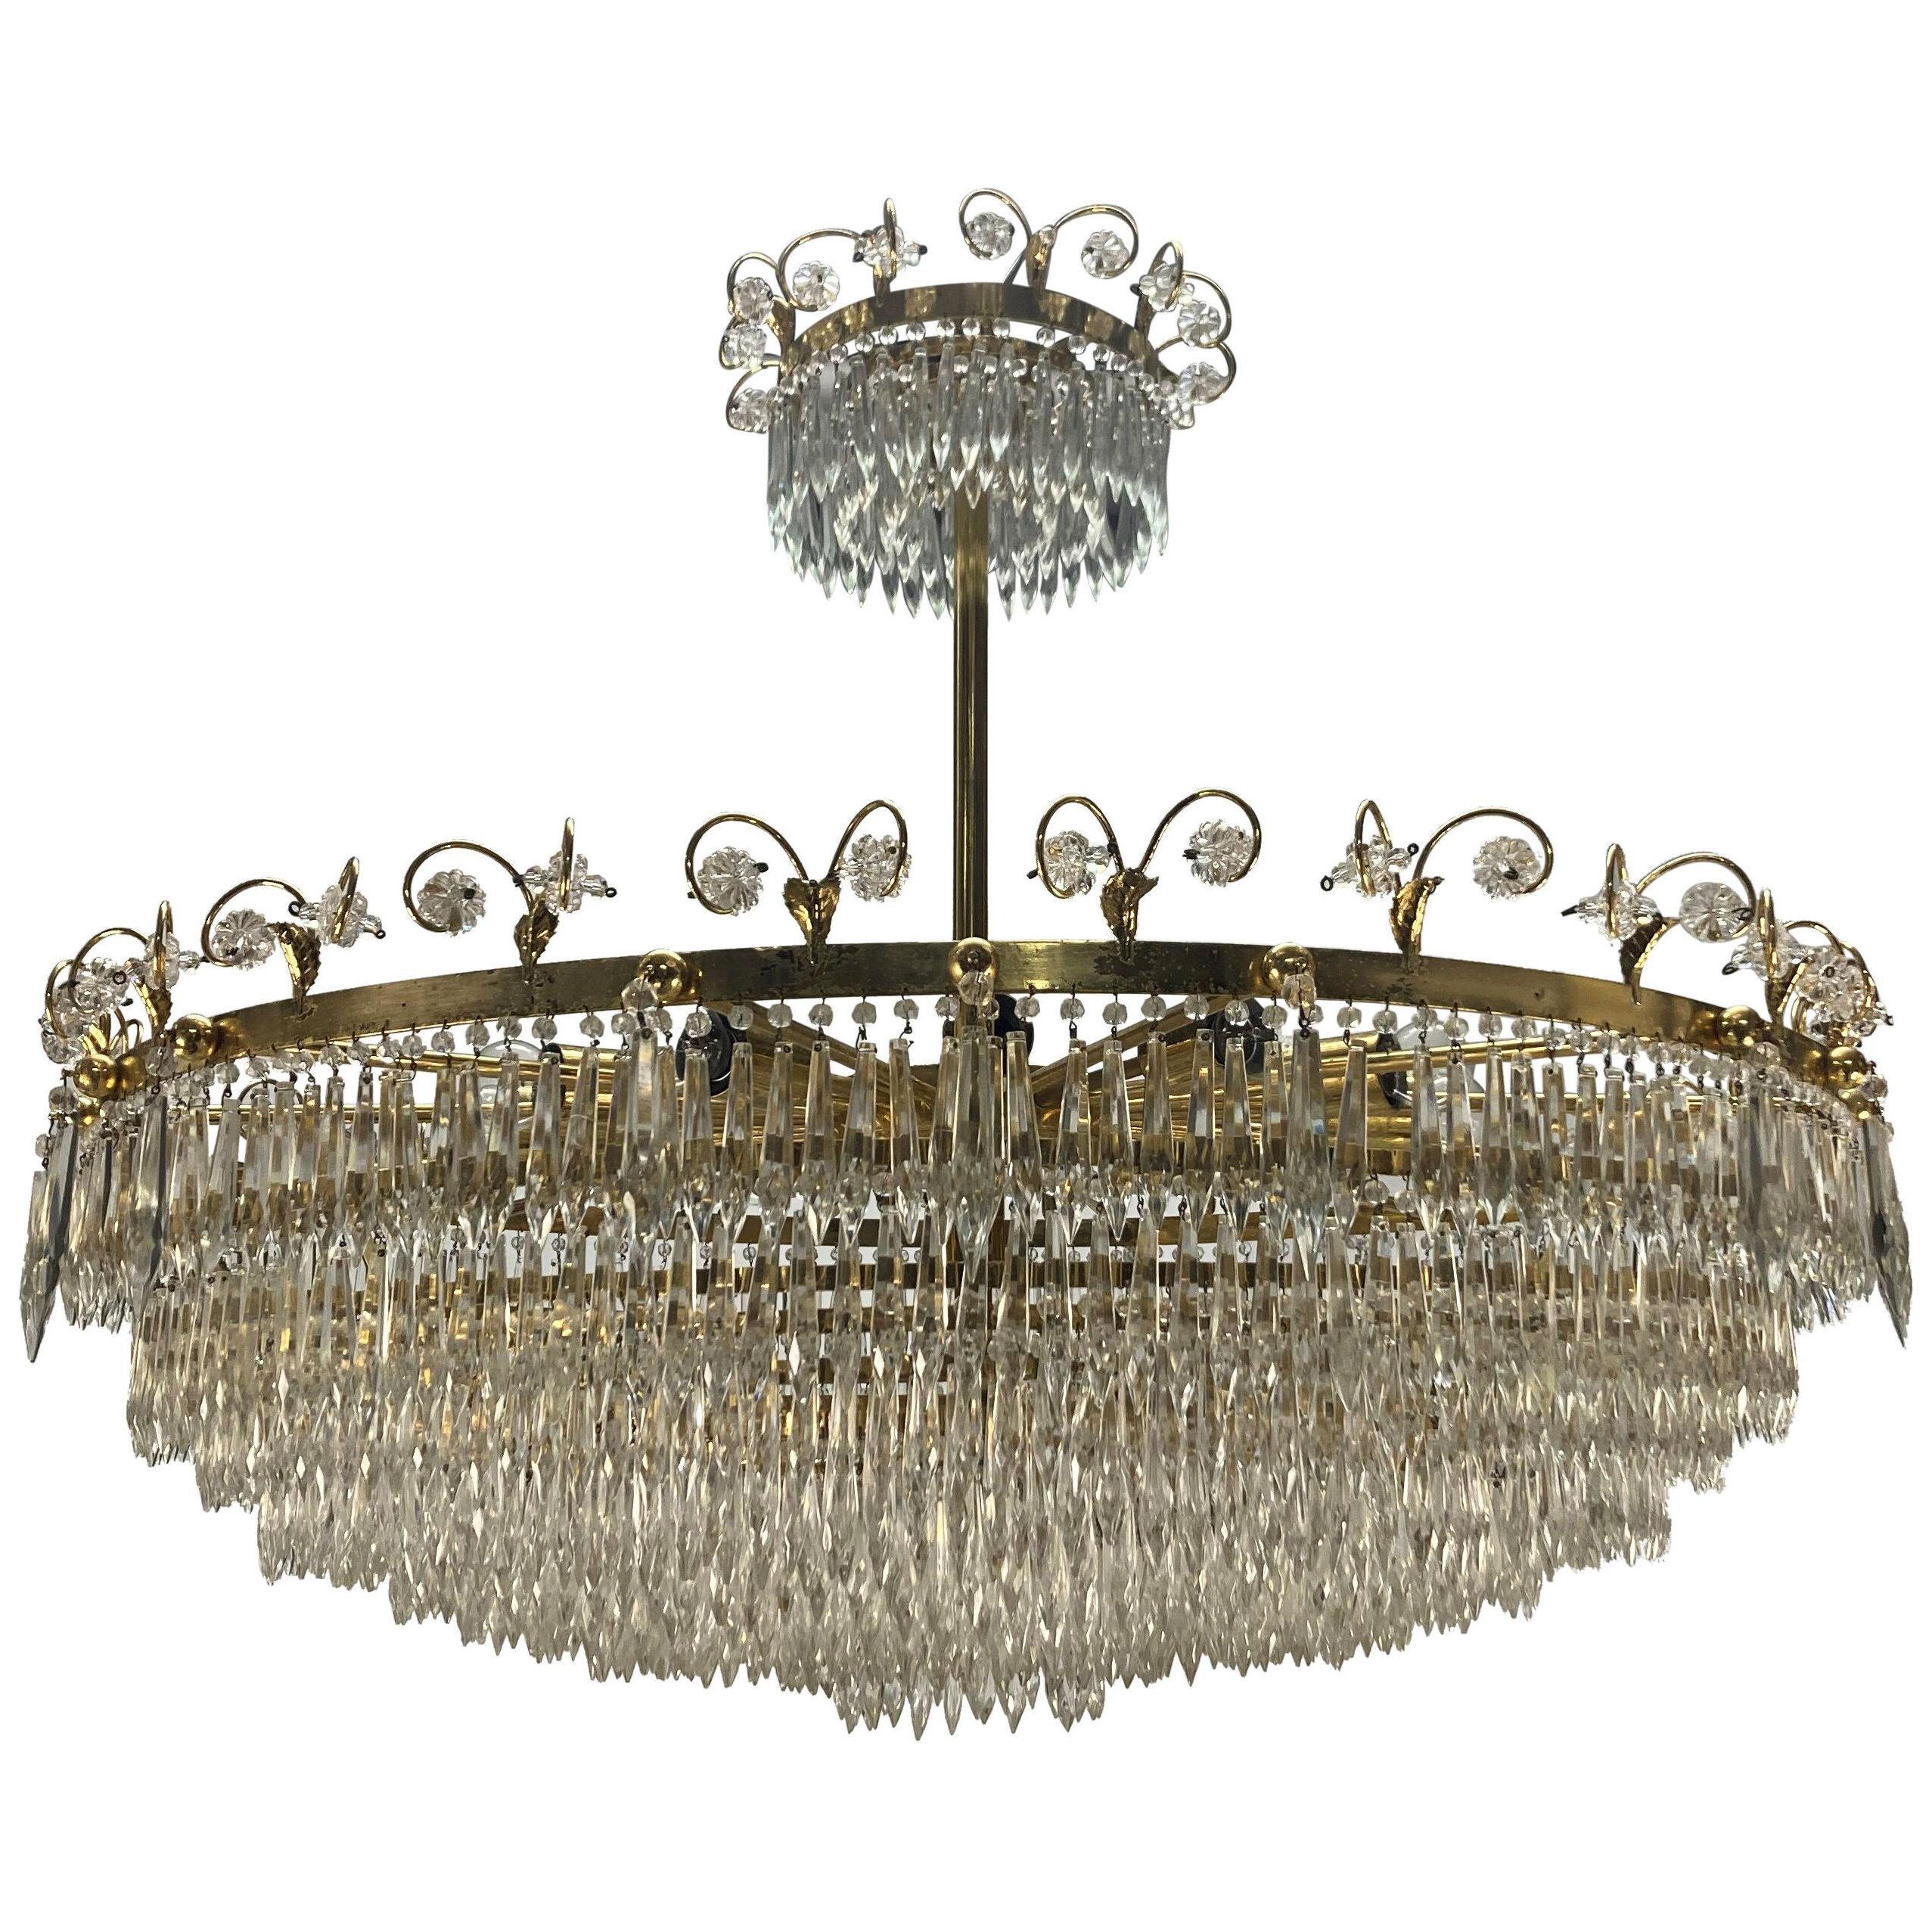 A LARGE MID-CENTURY CIRCULAR GRADUATED WATERFALL CHANDELIER